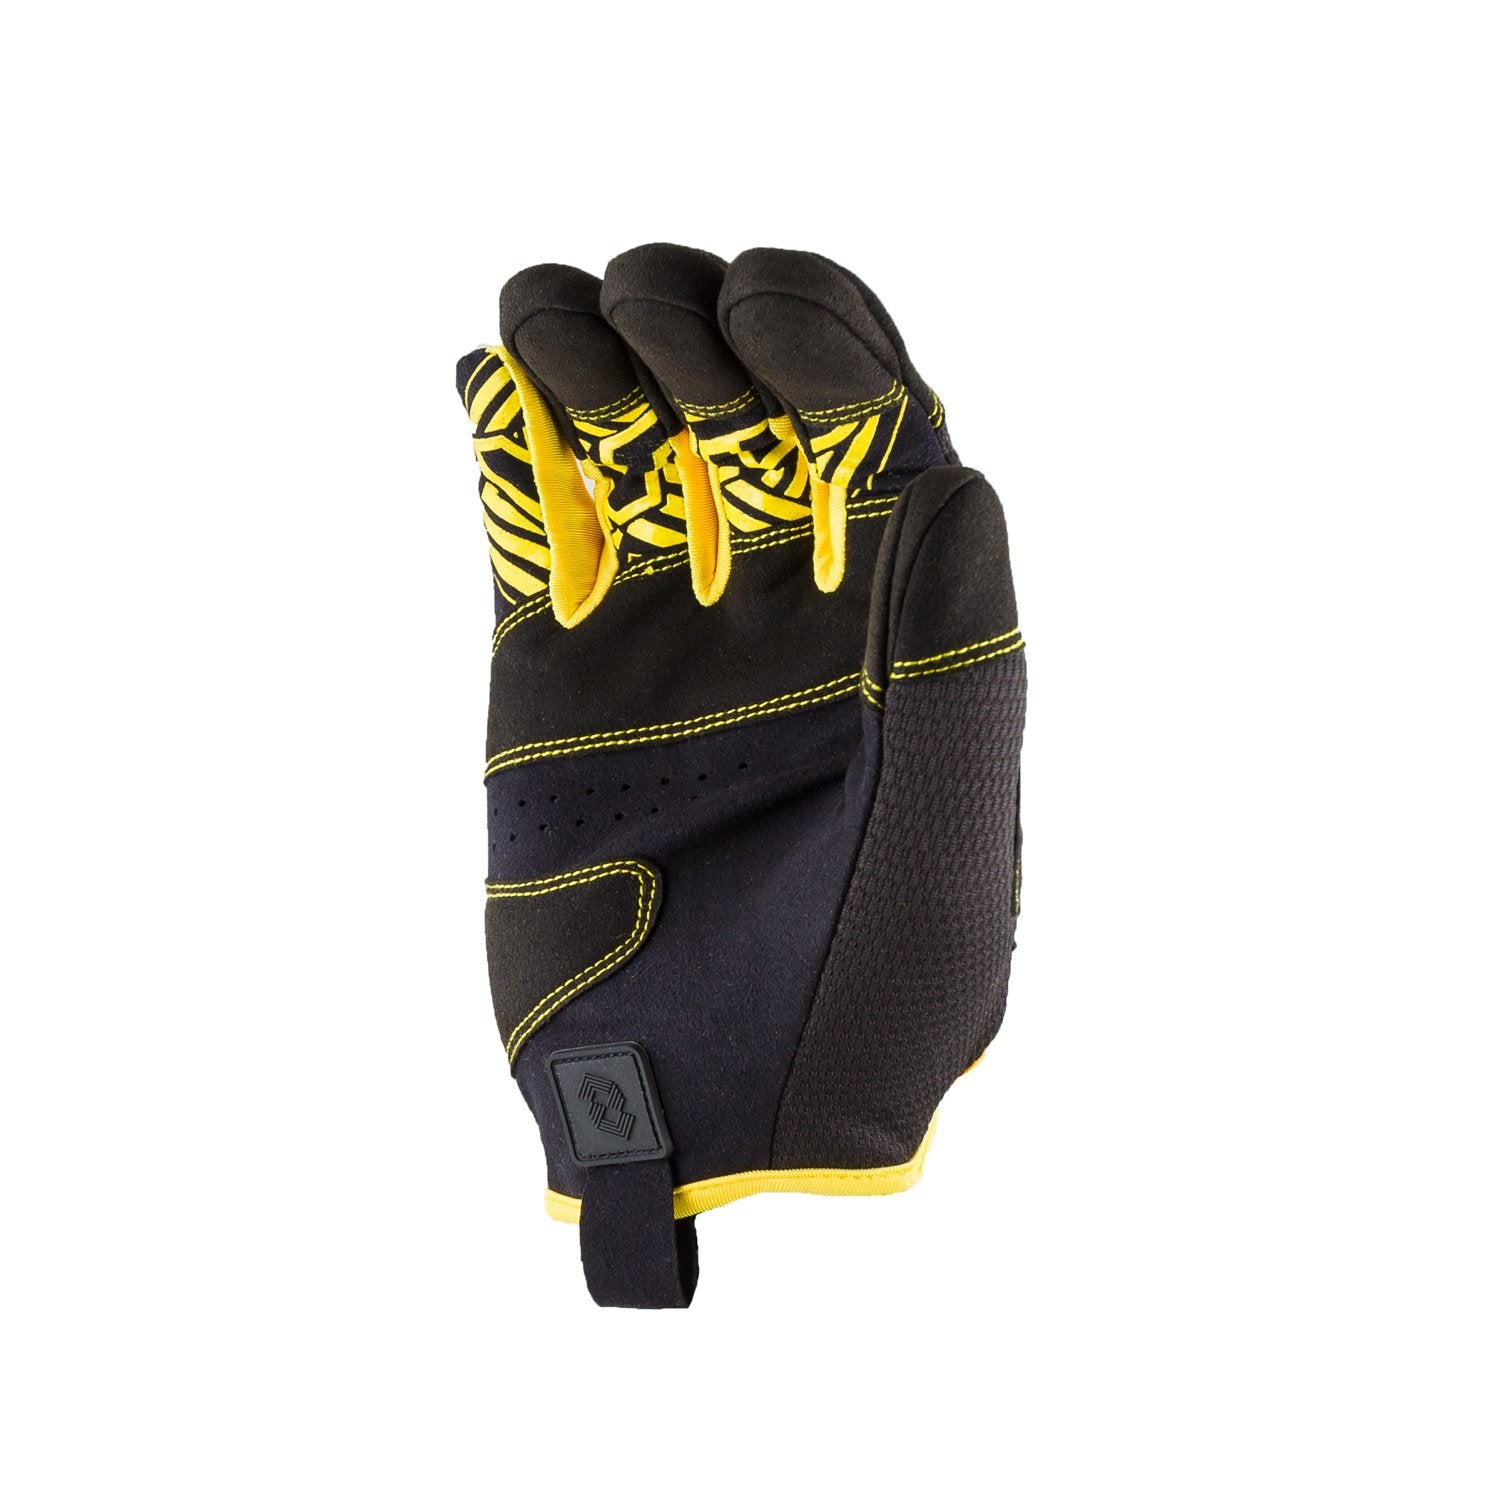 WTD Dirt Track Smartglove with silicone grip